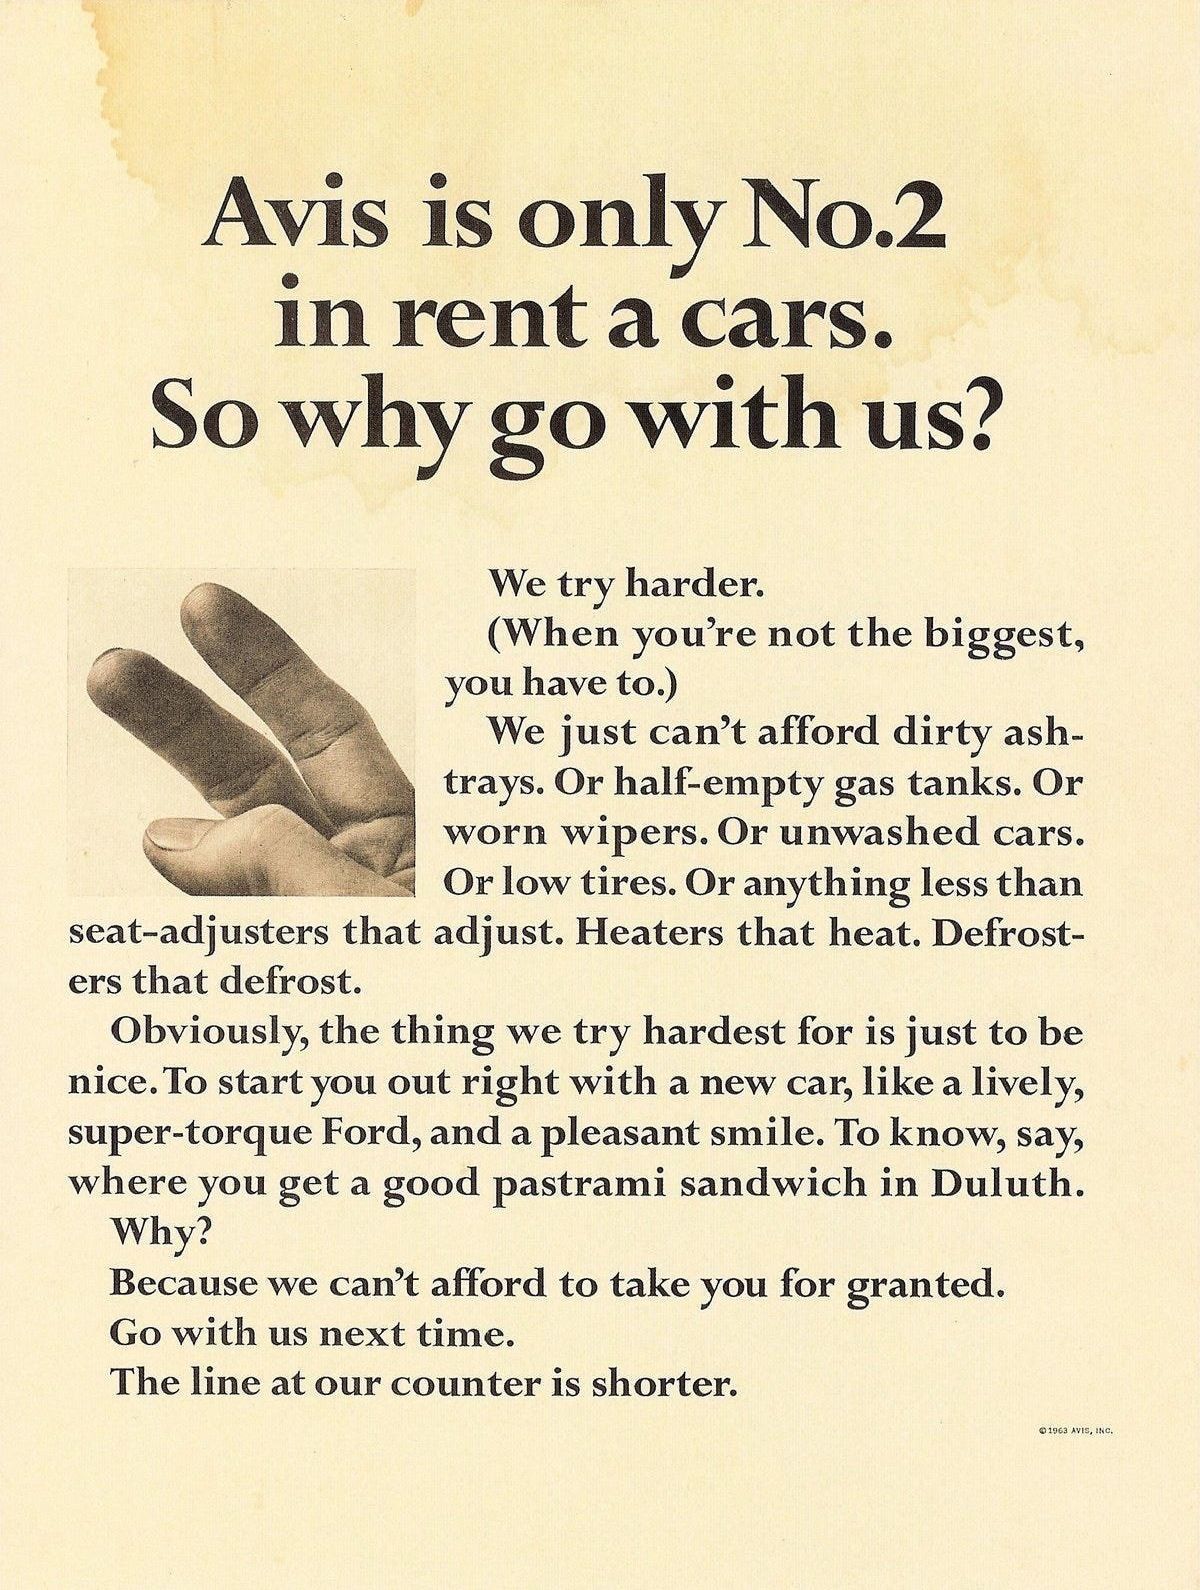 An advertisement from Avis in 1963:  Avis is only No.2 in rent a cars. So why go with us? We try harder. (When you’re not the biggest, you have to.) We just can’t afford dirty ashtrays. Or half-empty gas tanks. Or worn wipers. Or unwashed cars. Or low tires. Or anything less than seat-adjusters that adjust. Heaters that heat. Defrosters that defrost. Obviously, the thing we try hardest for is just to be nice. To start you out right with a new car, like a lively, super-torque Ford, and a pleasant smile. To know, say, where you get a good pastrami sandwich in Duluth. Why? Because we can't afford to take you for granted. Go with us next time. The line at our counter is shorter.